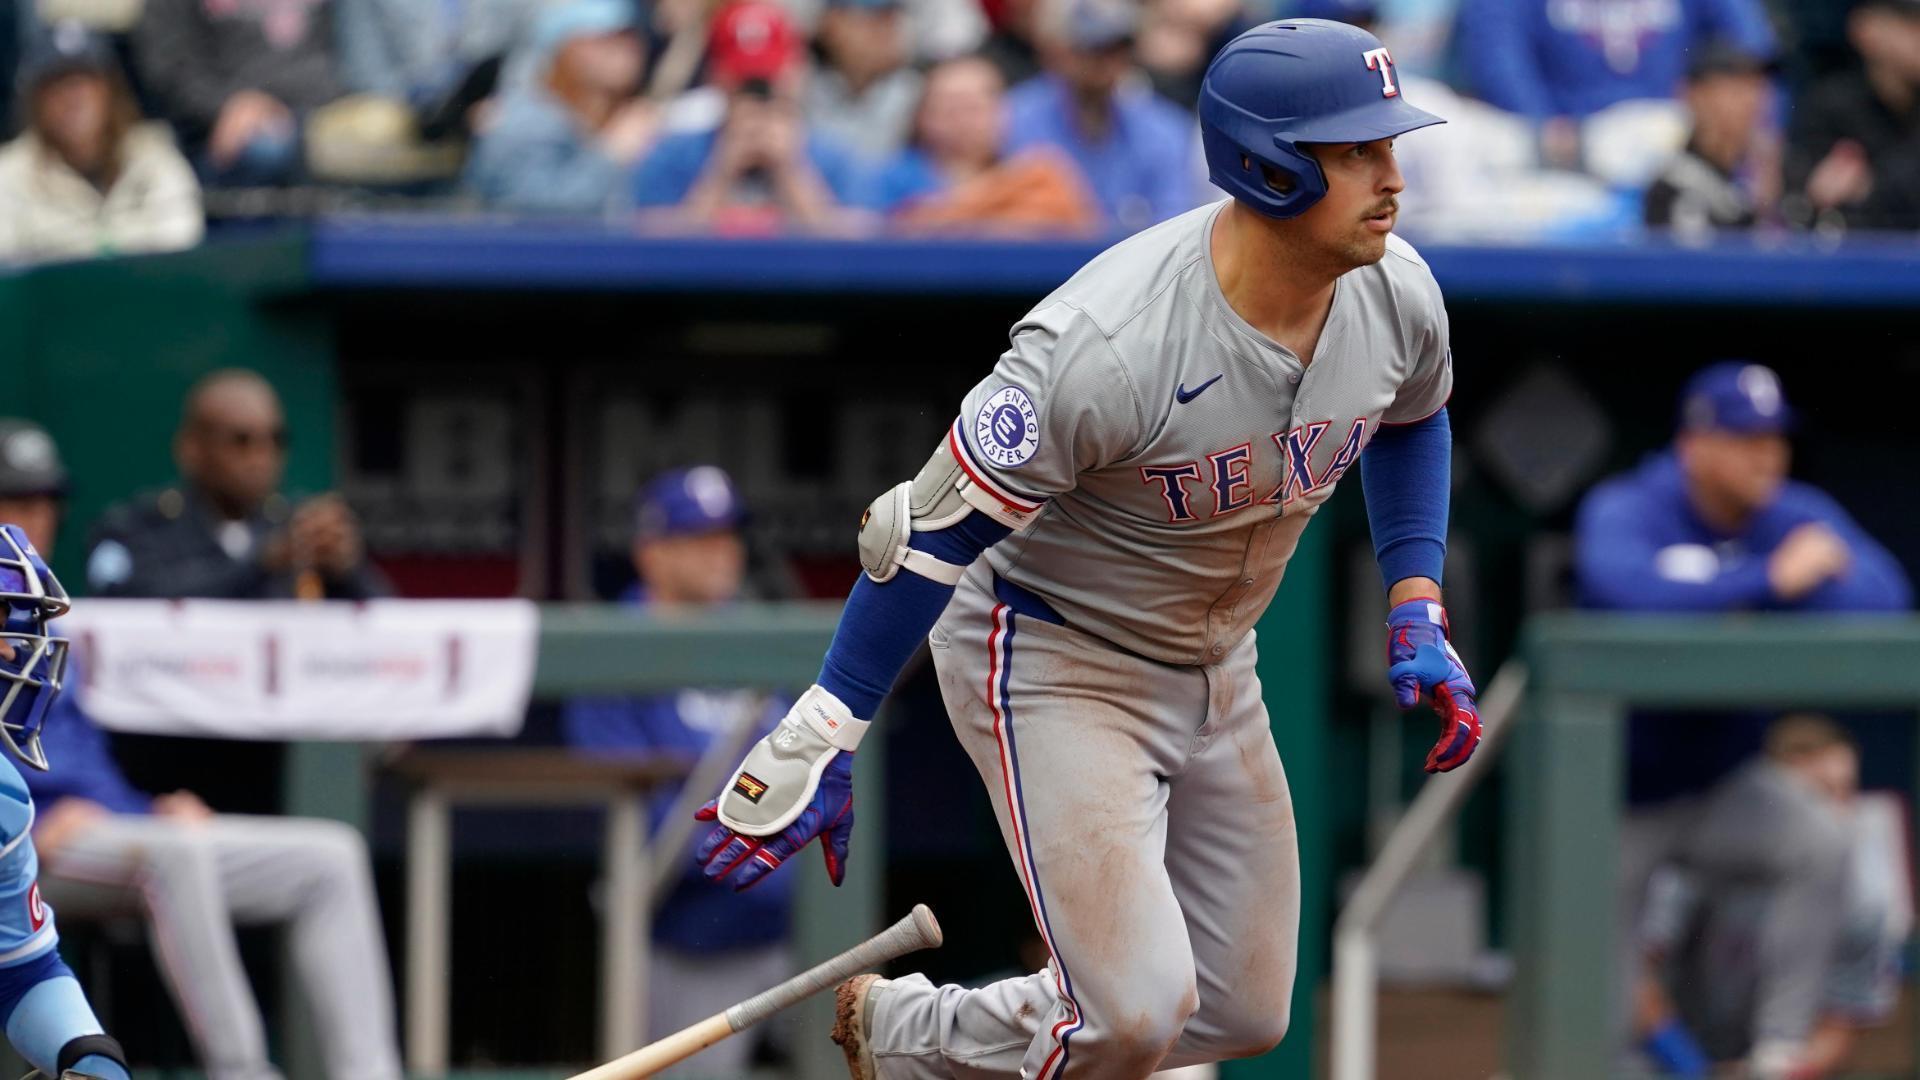 Nathaniel Lowe's 10th-inning single gives Rangers the win